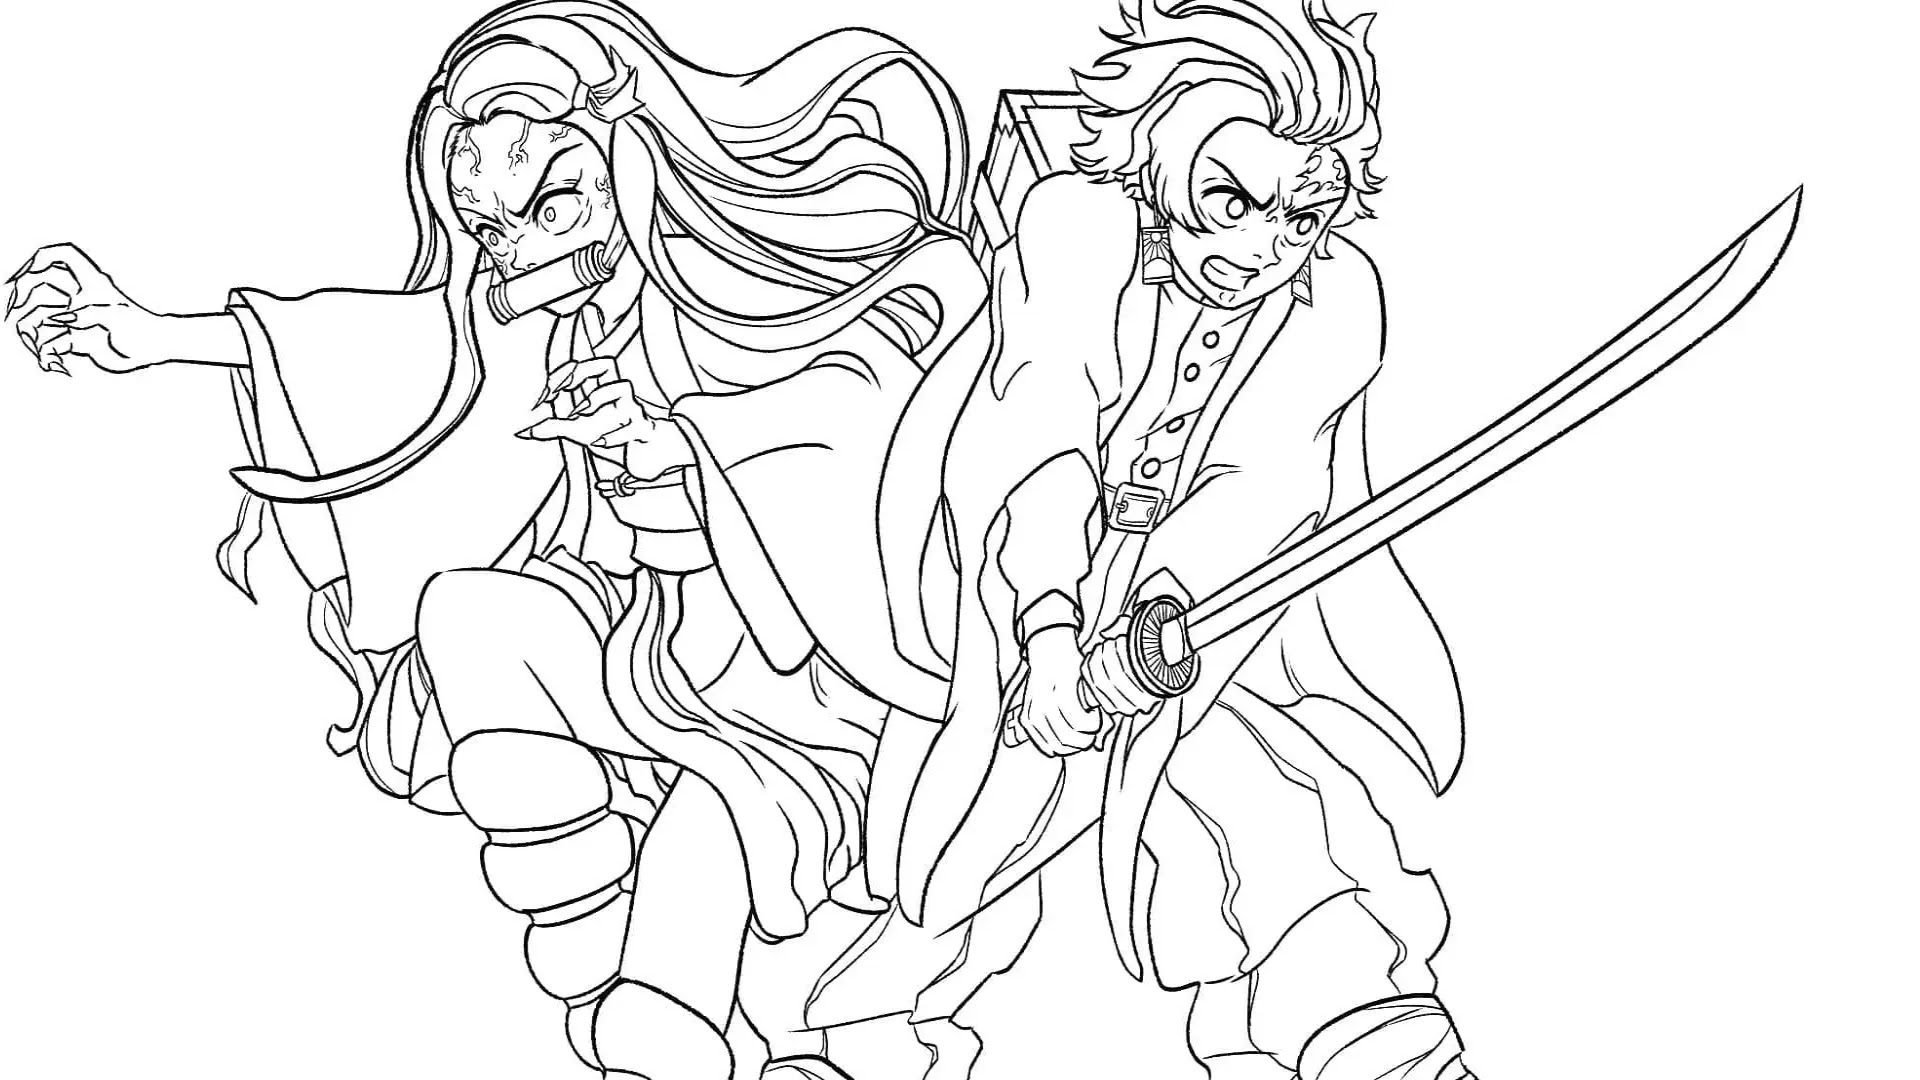 Demon Slayer Coloring Pages for Kids